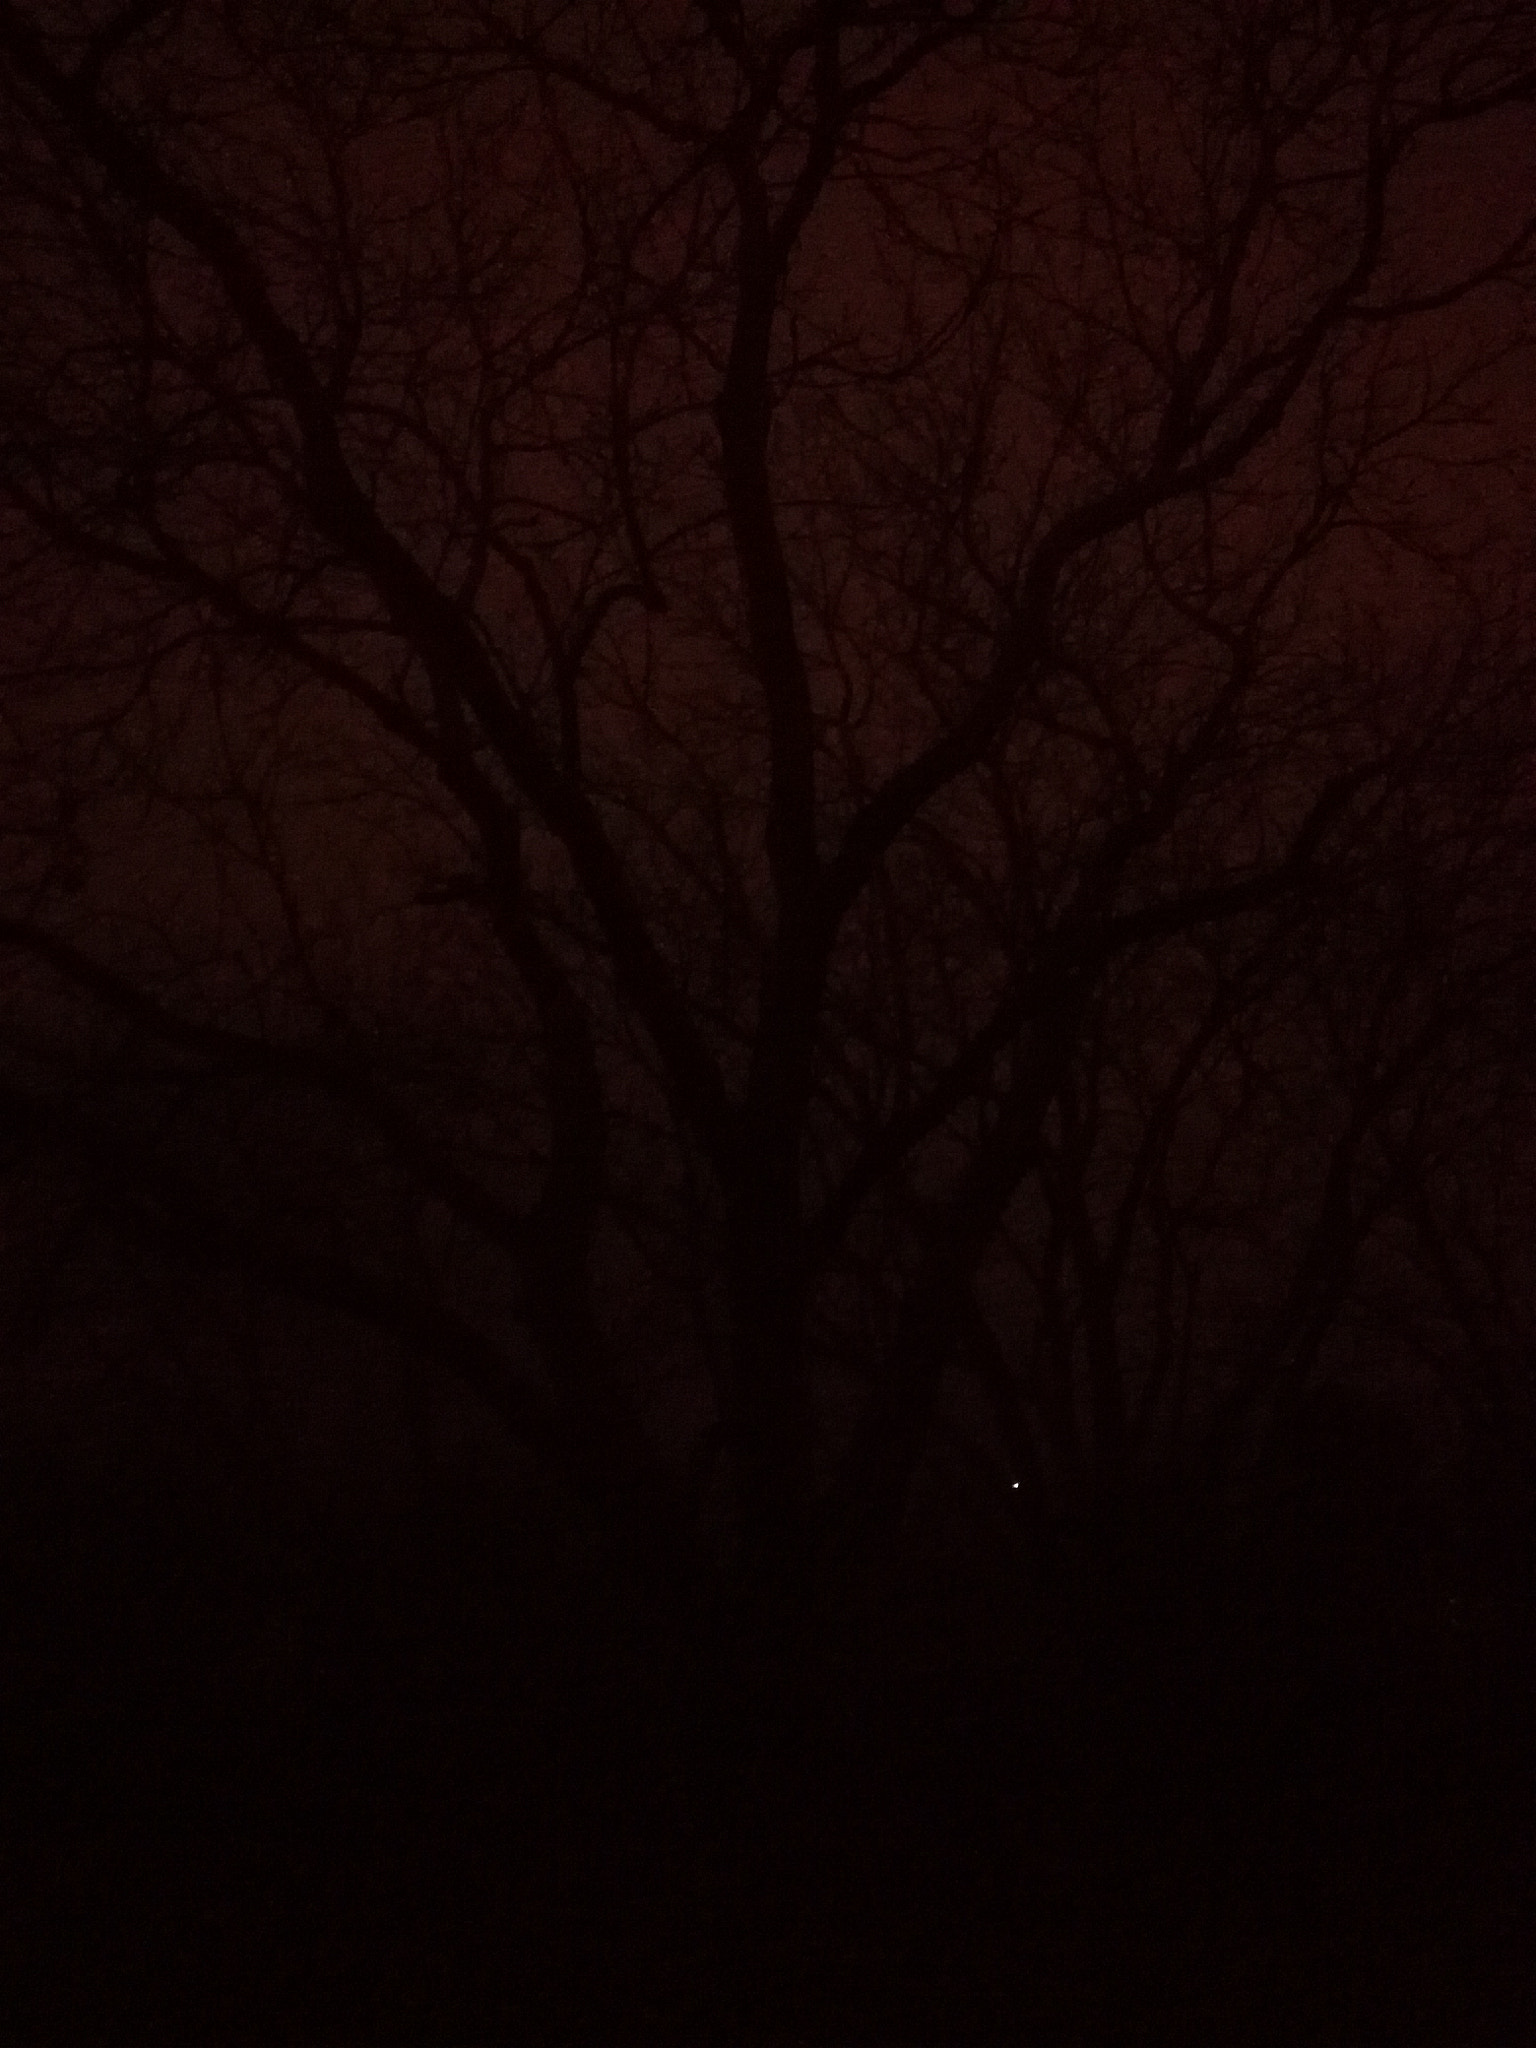 HUAWEI GT3 sample photo. Old tree, blood, fear photography